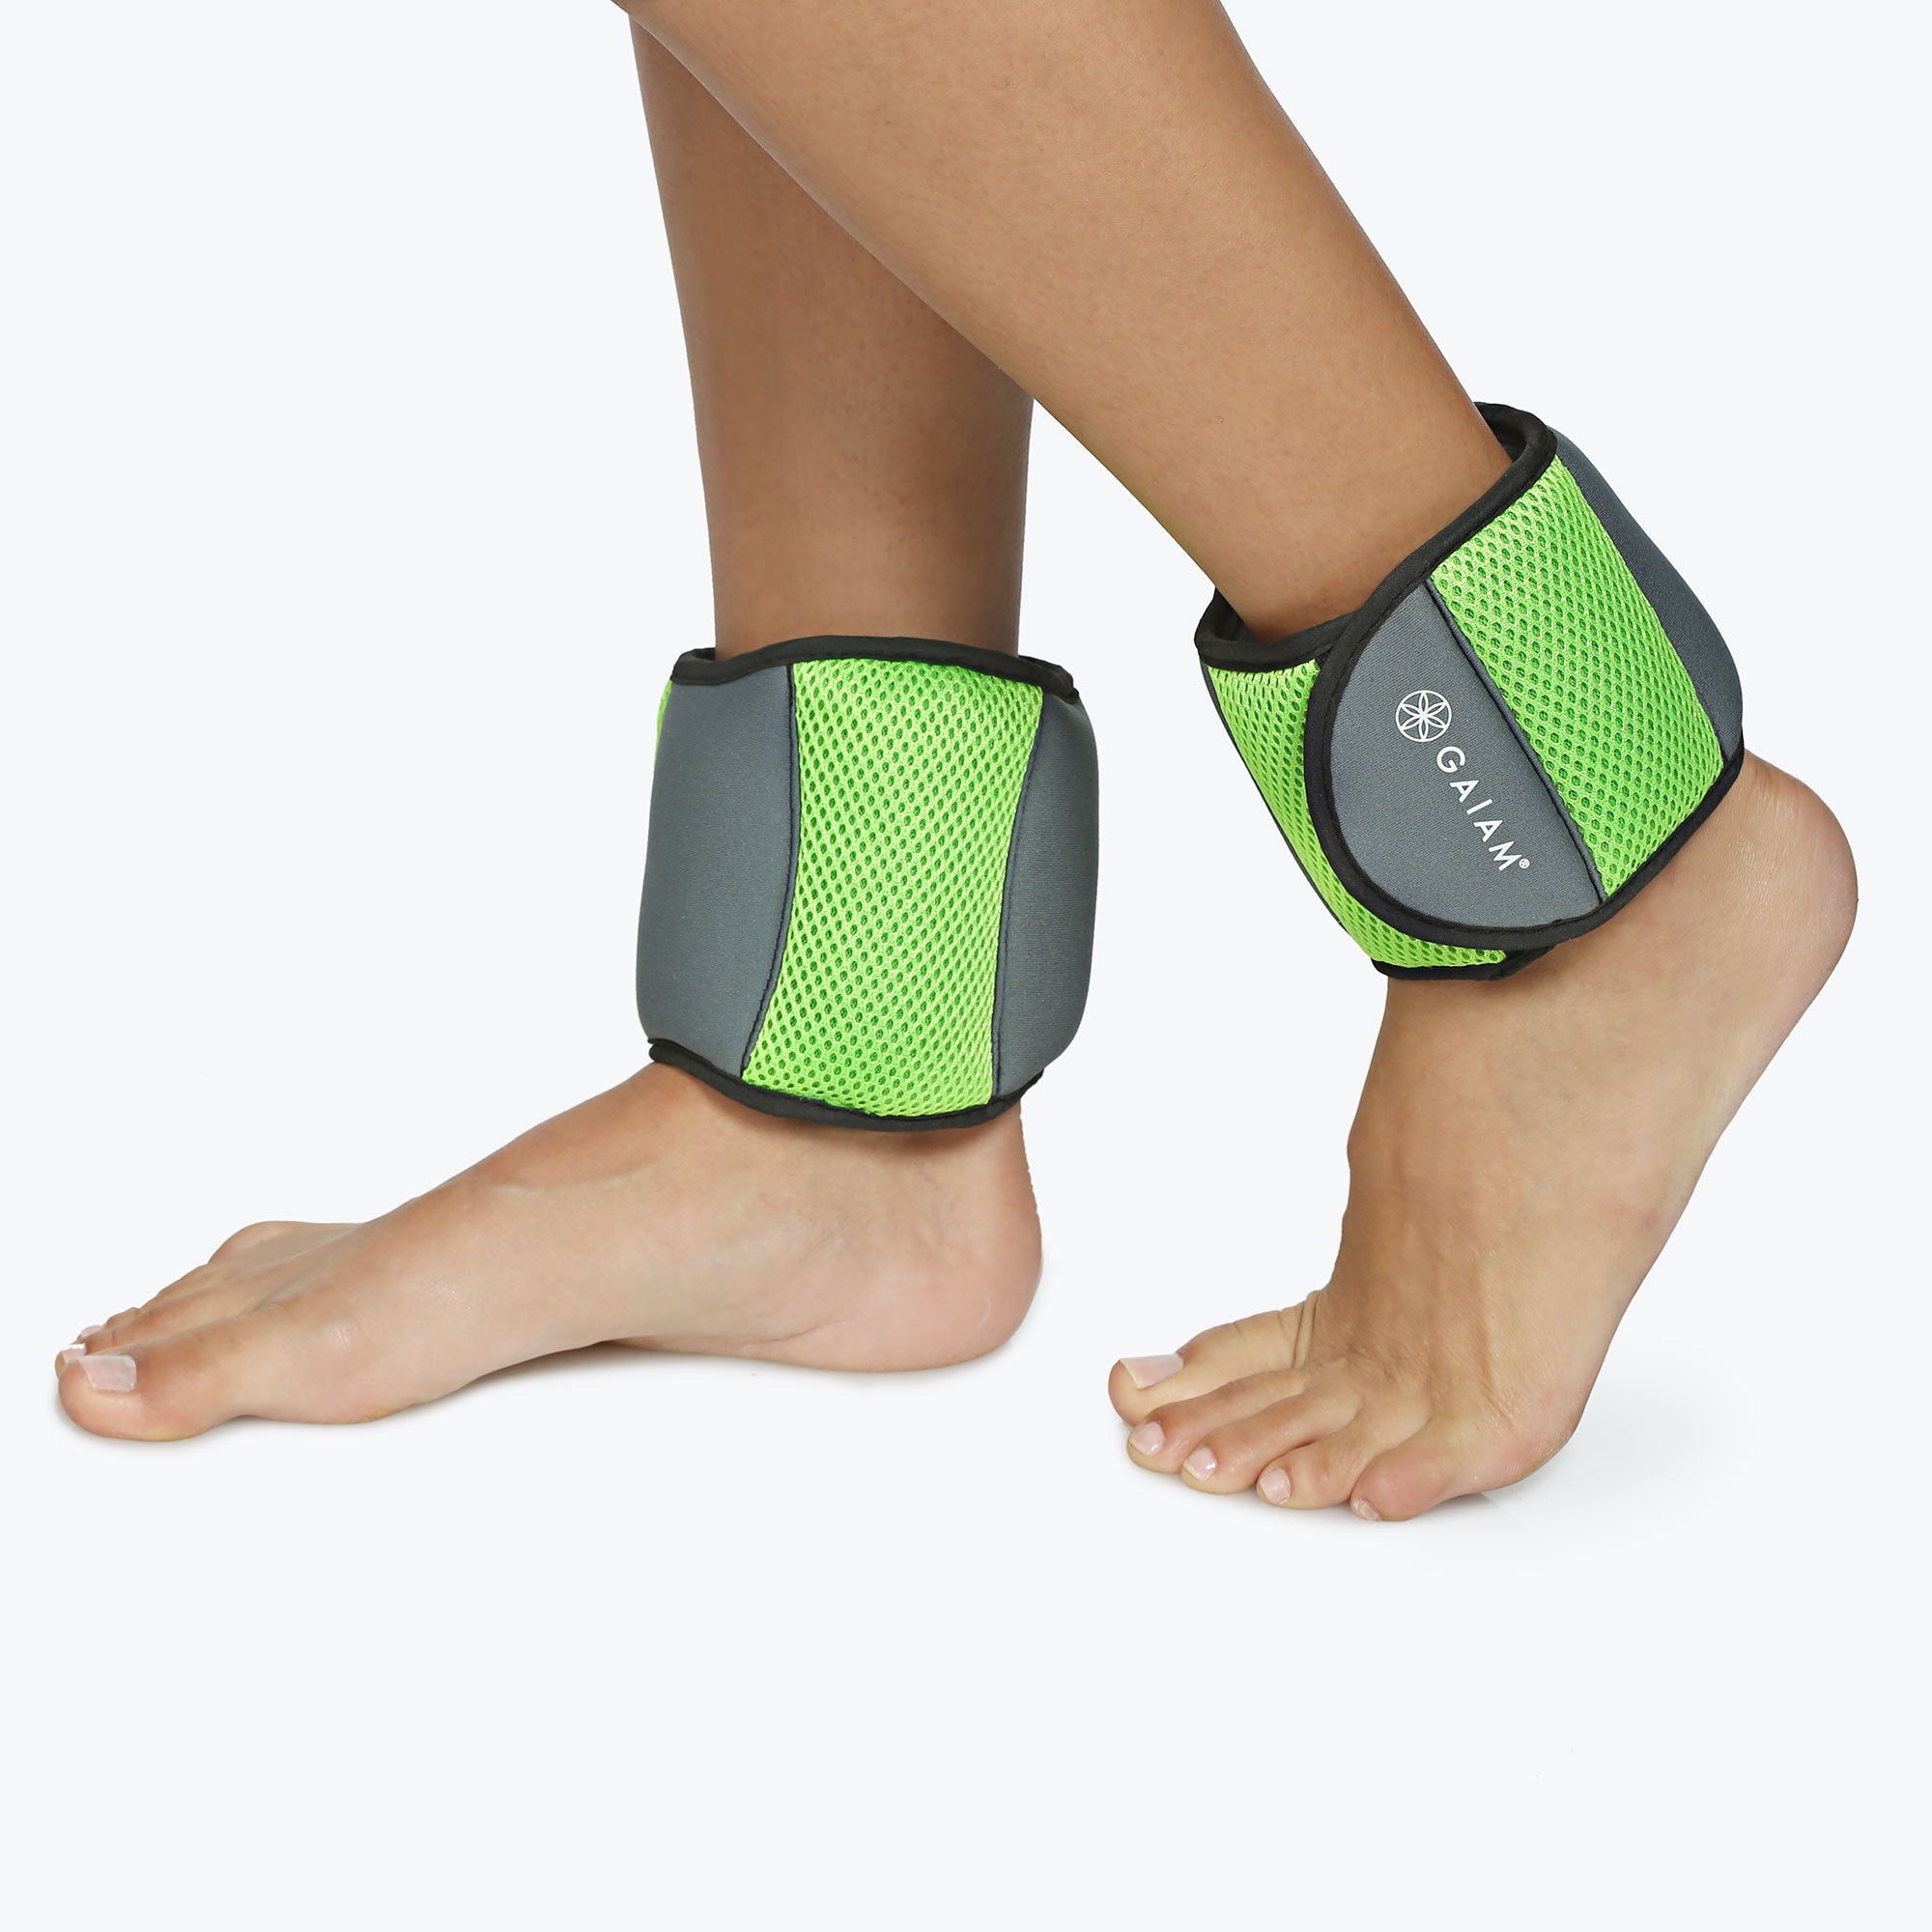 Restore Ankle Weights - 5 lb Ankle Weights - Gaiam